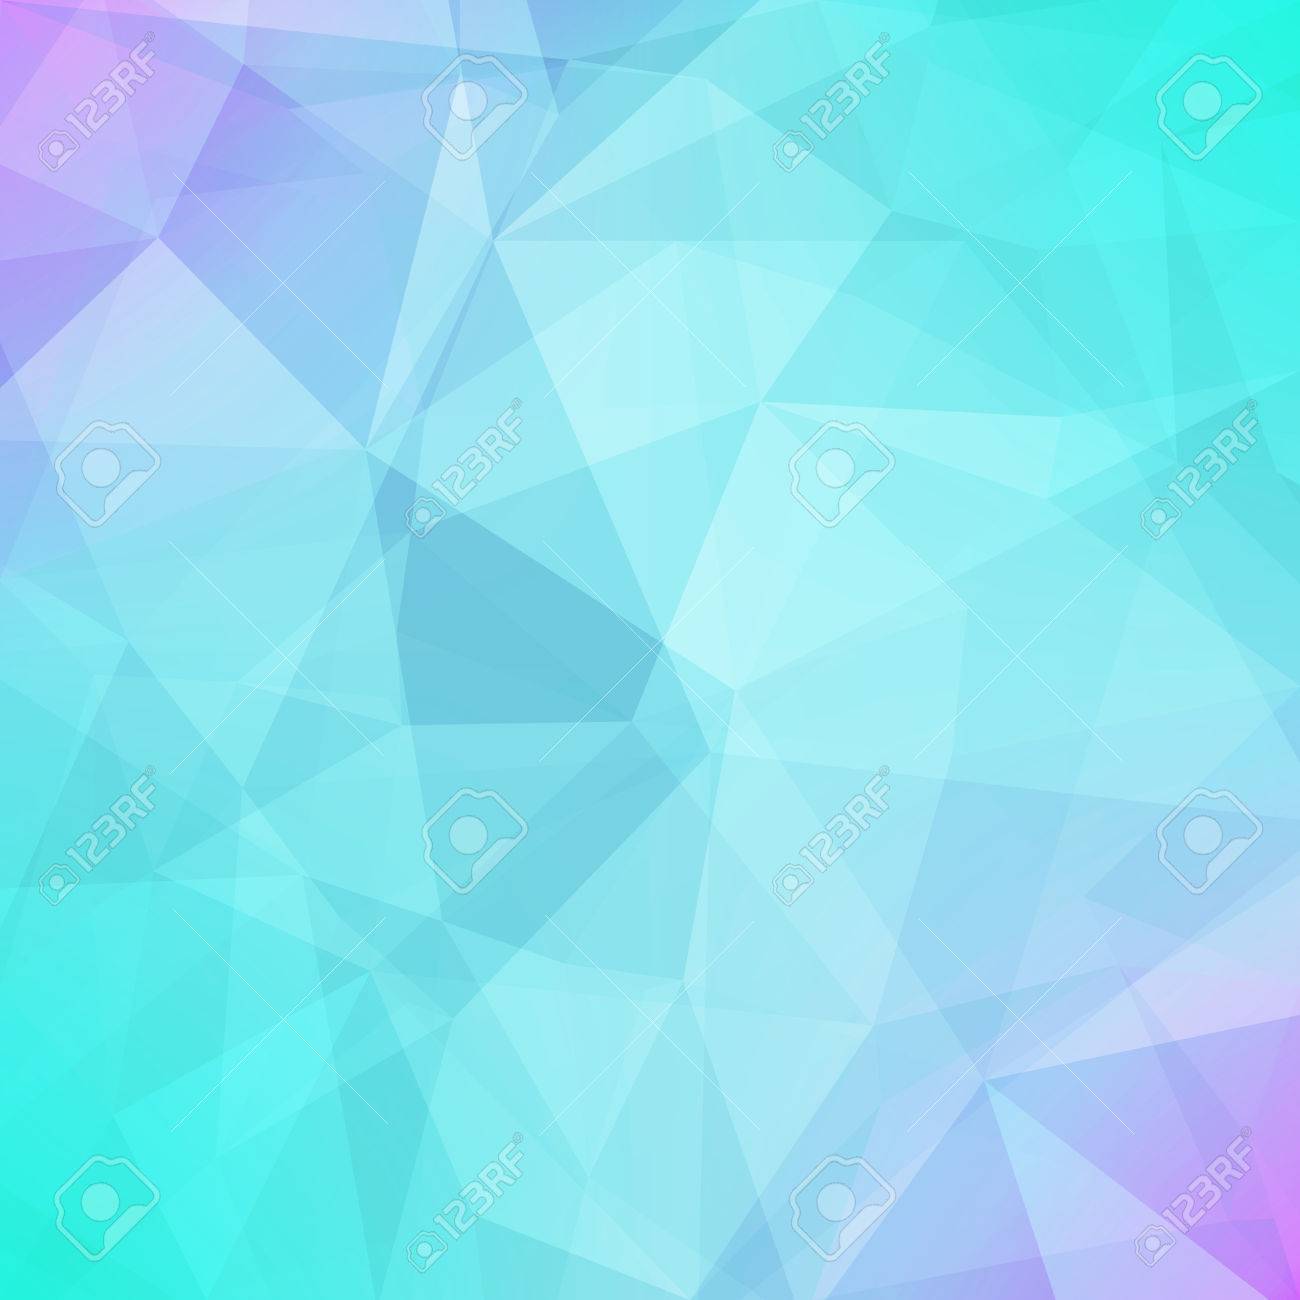 Gradient Abstract Square Triangle Background Cool Ice Colored